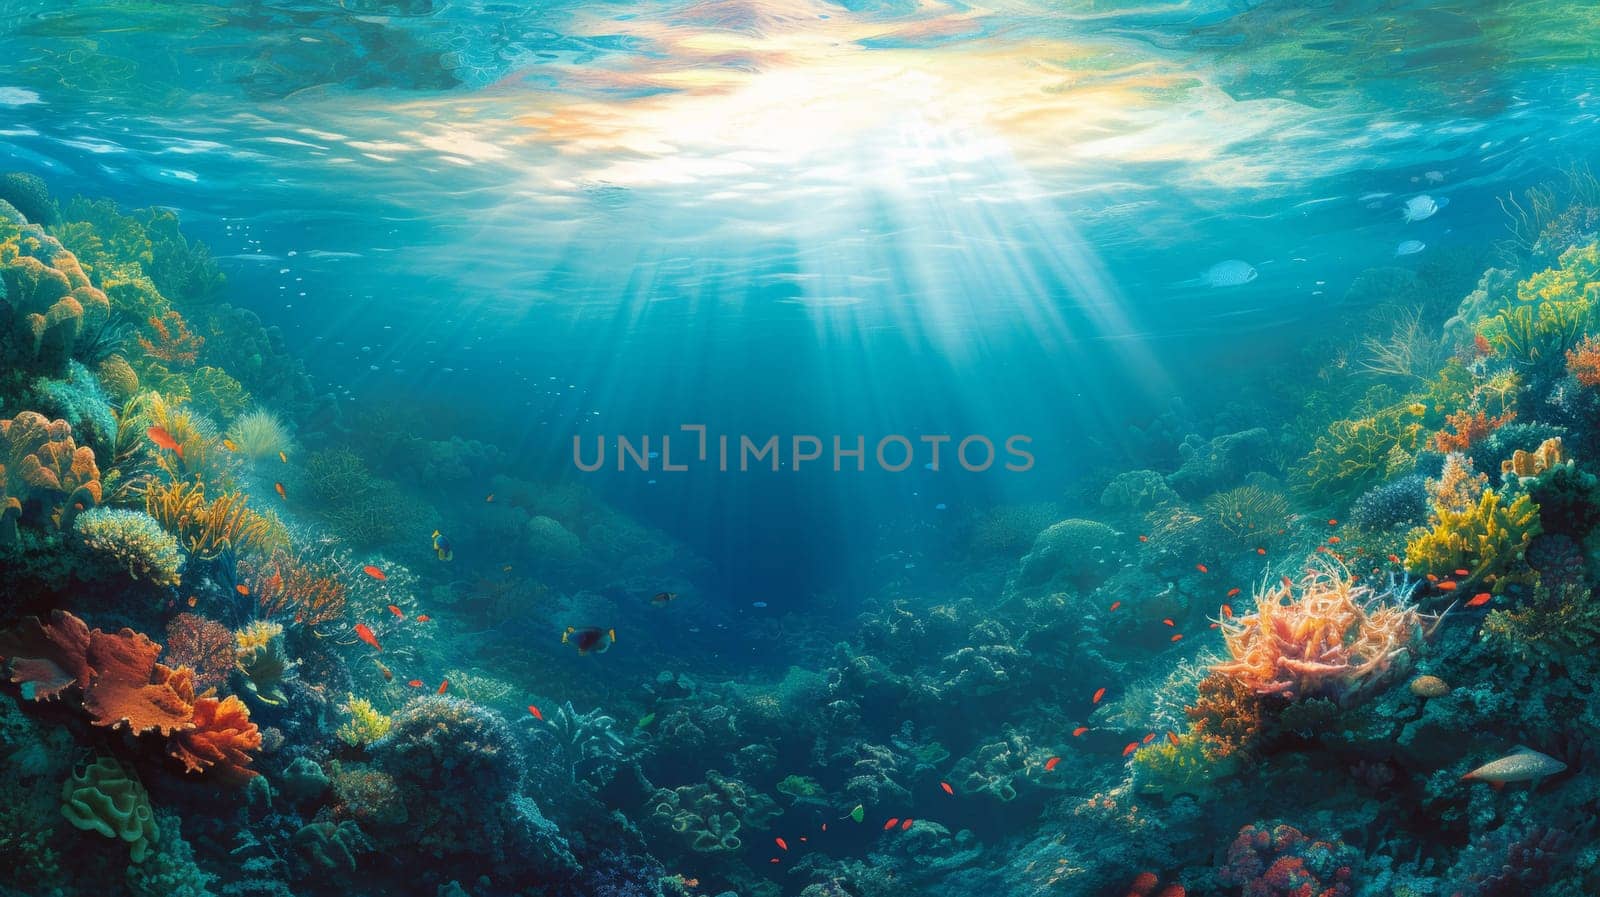 A beautiful underwater scene with sunlight shining through the water, AI by starush